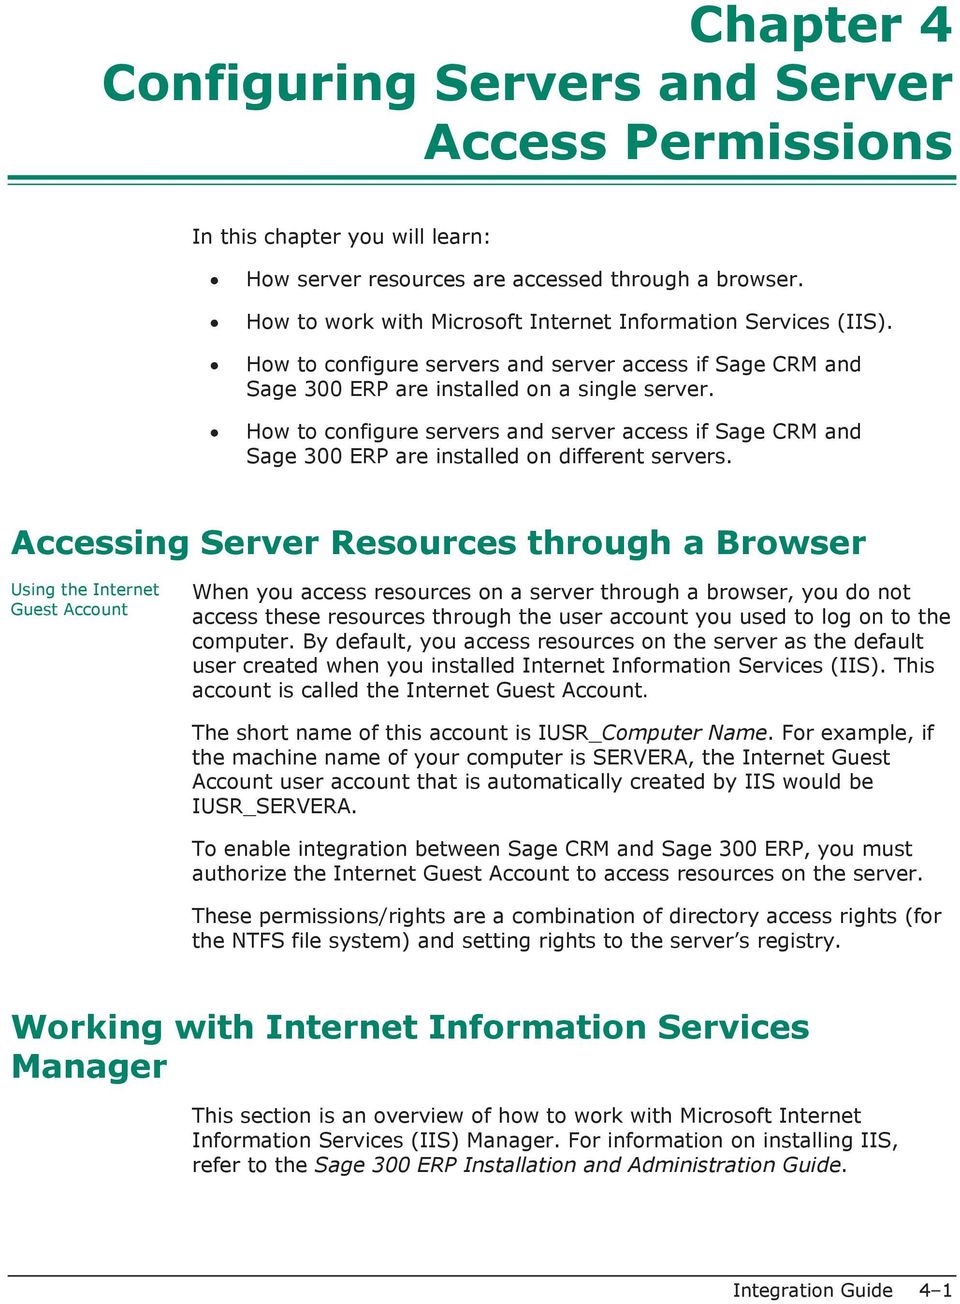 How to configure servers and server access if Sage CRM and Sage 300 ERP are installed on different servers.